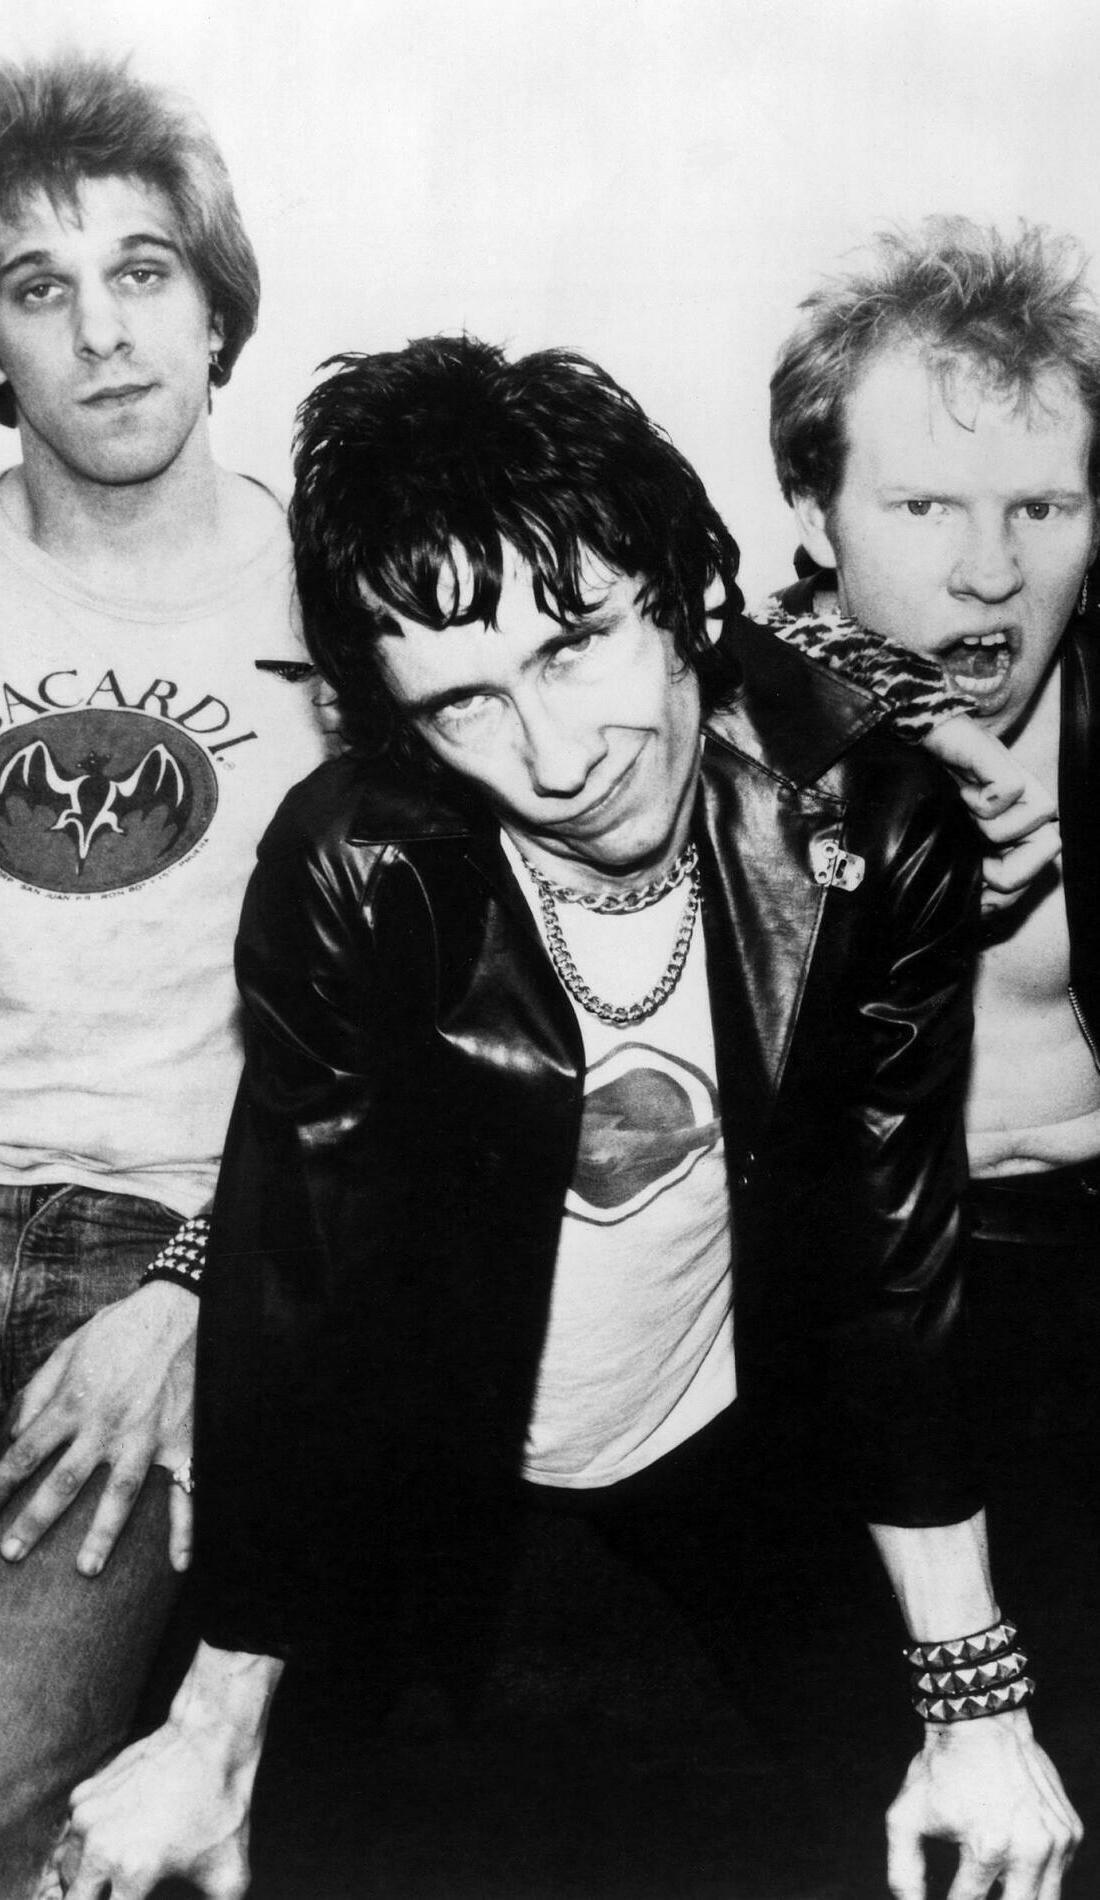 A The Dead Boys live event